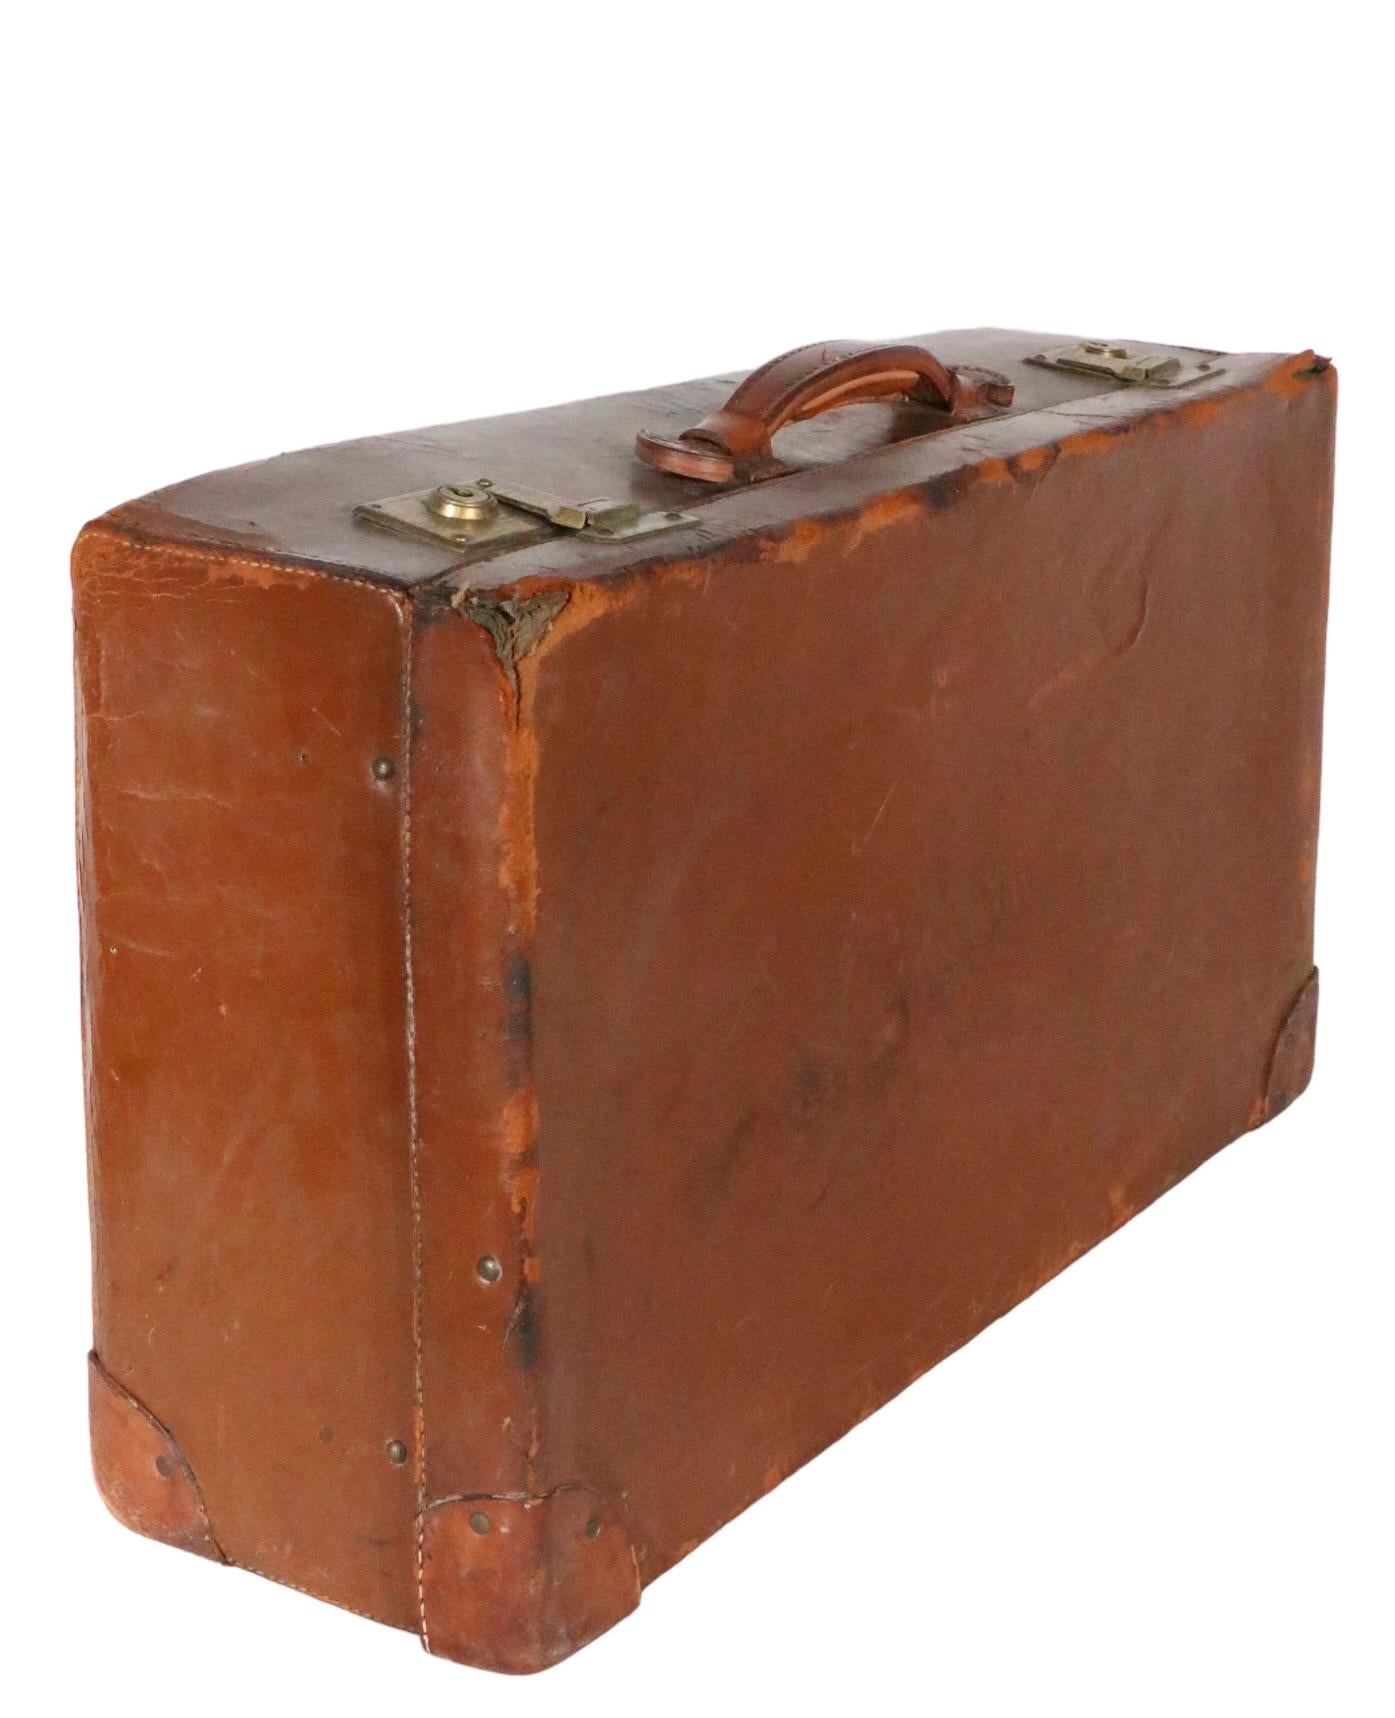 20th Century Vintage Leather Luggage Suitcase by Crouch & Fitzgerald, circa 1900s/ 1940s